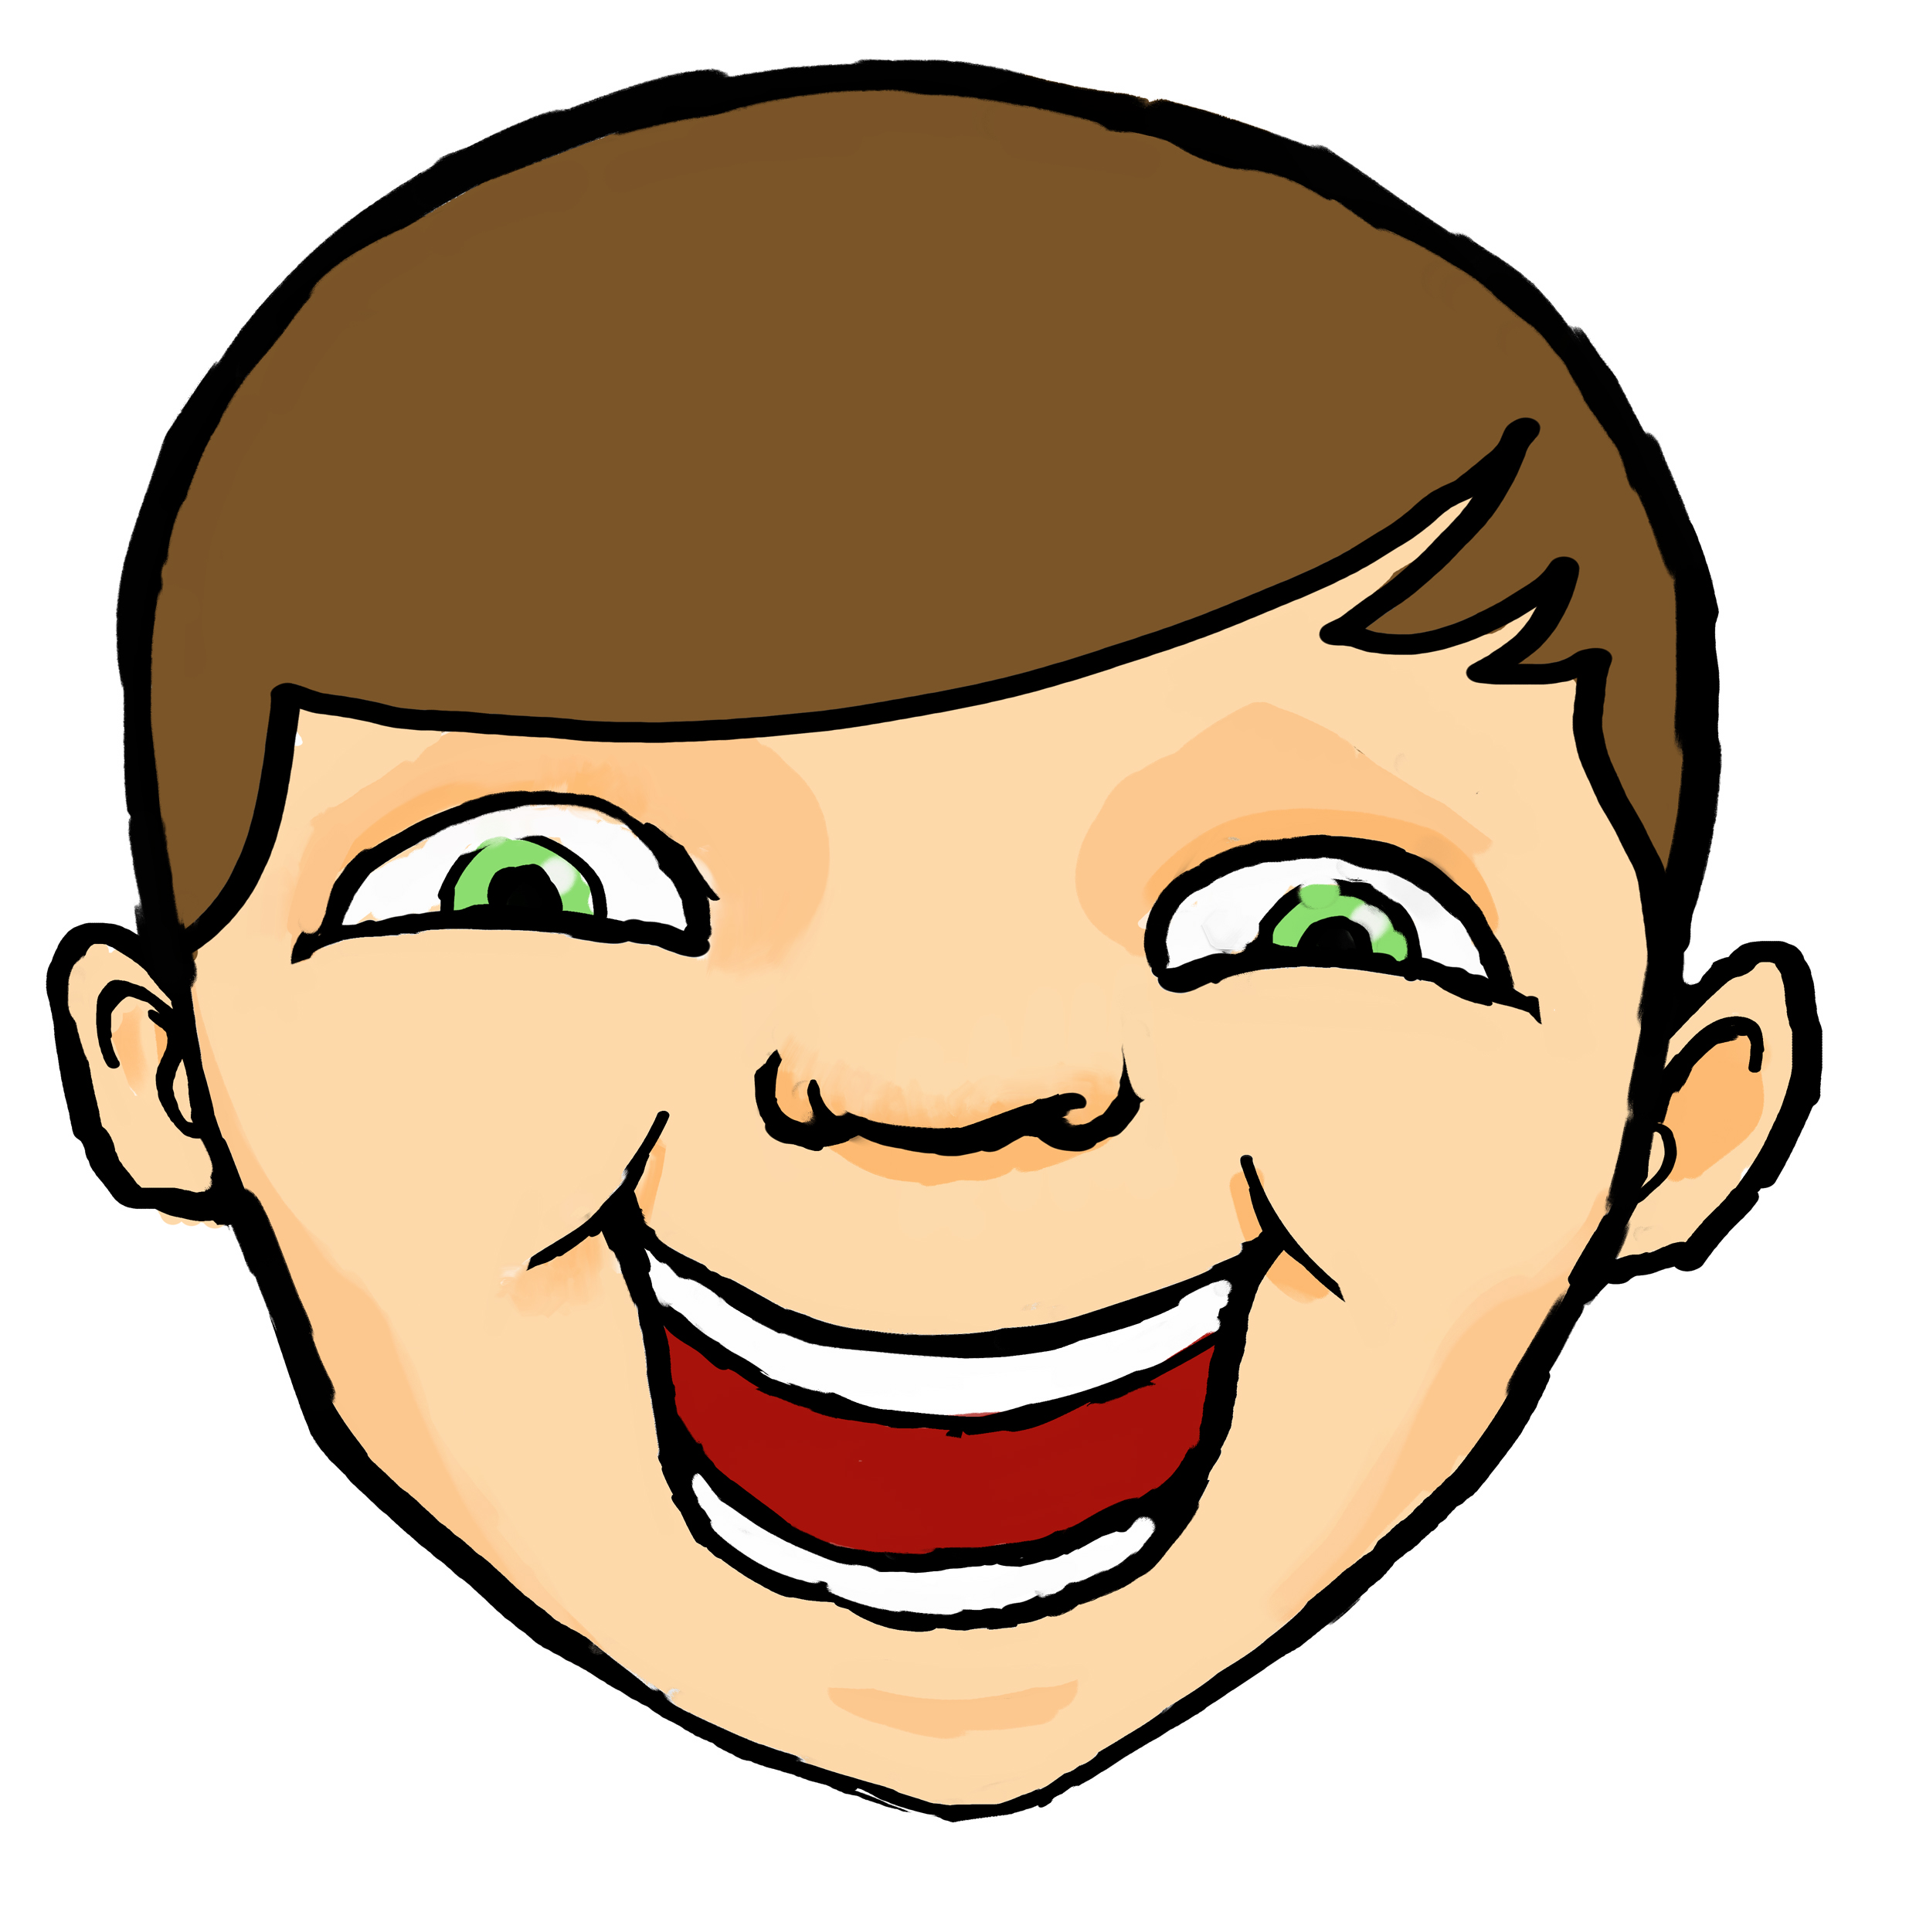 Laughing faces clip art